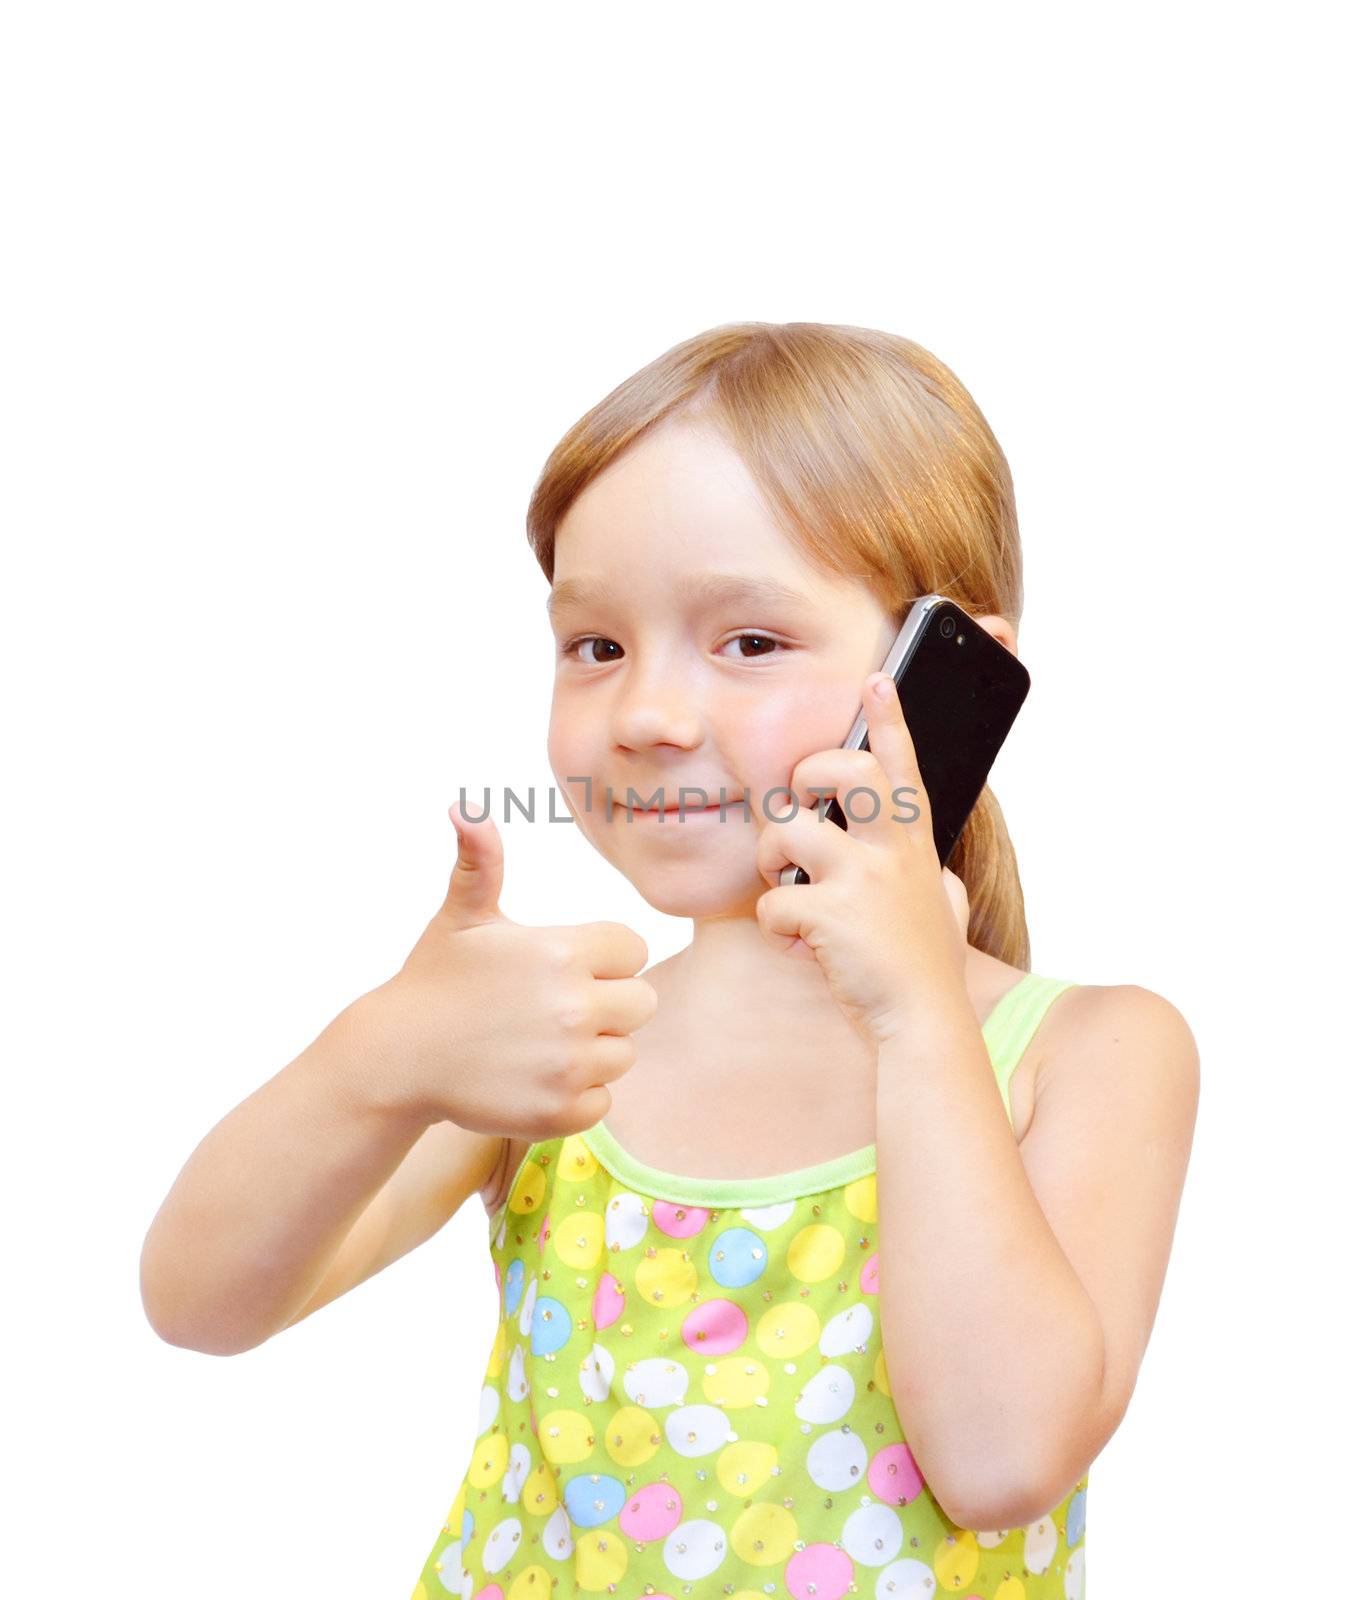 The Child and telephone, on white background.  